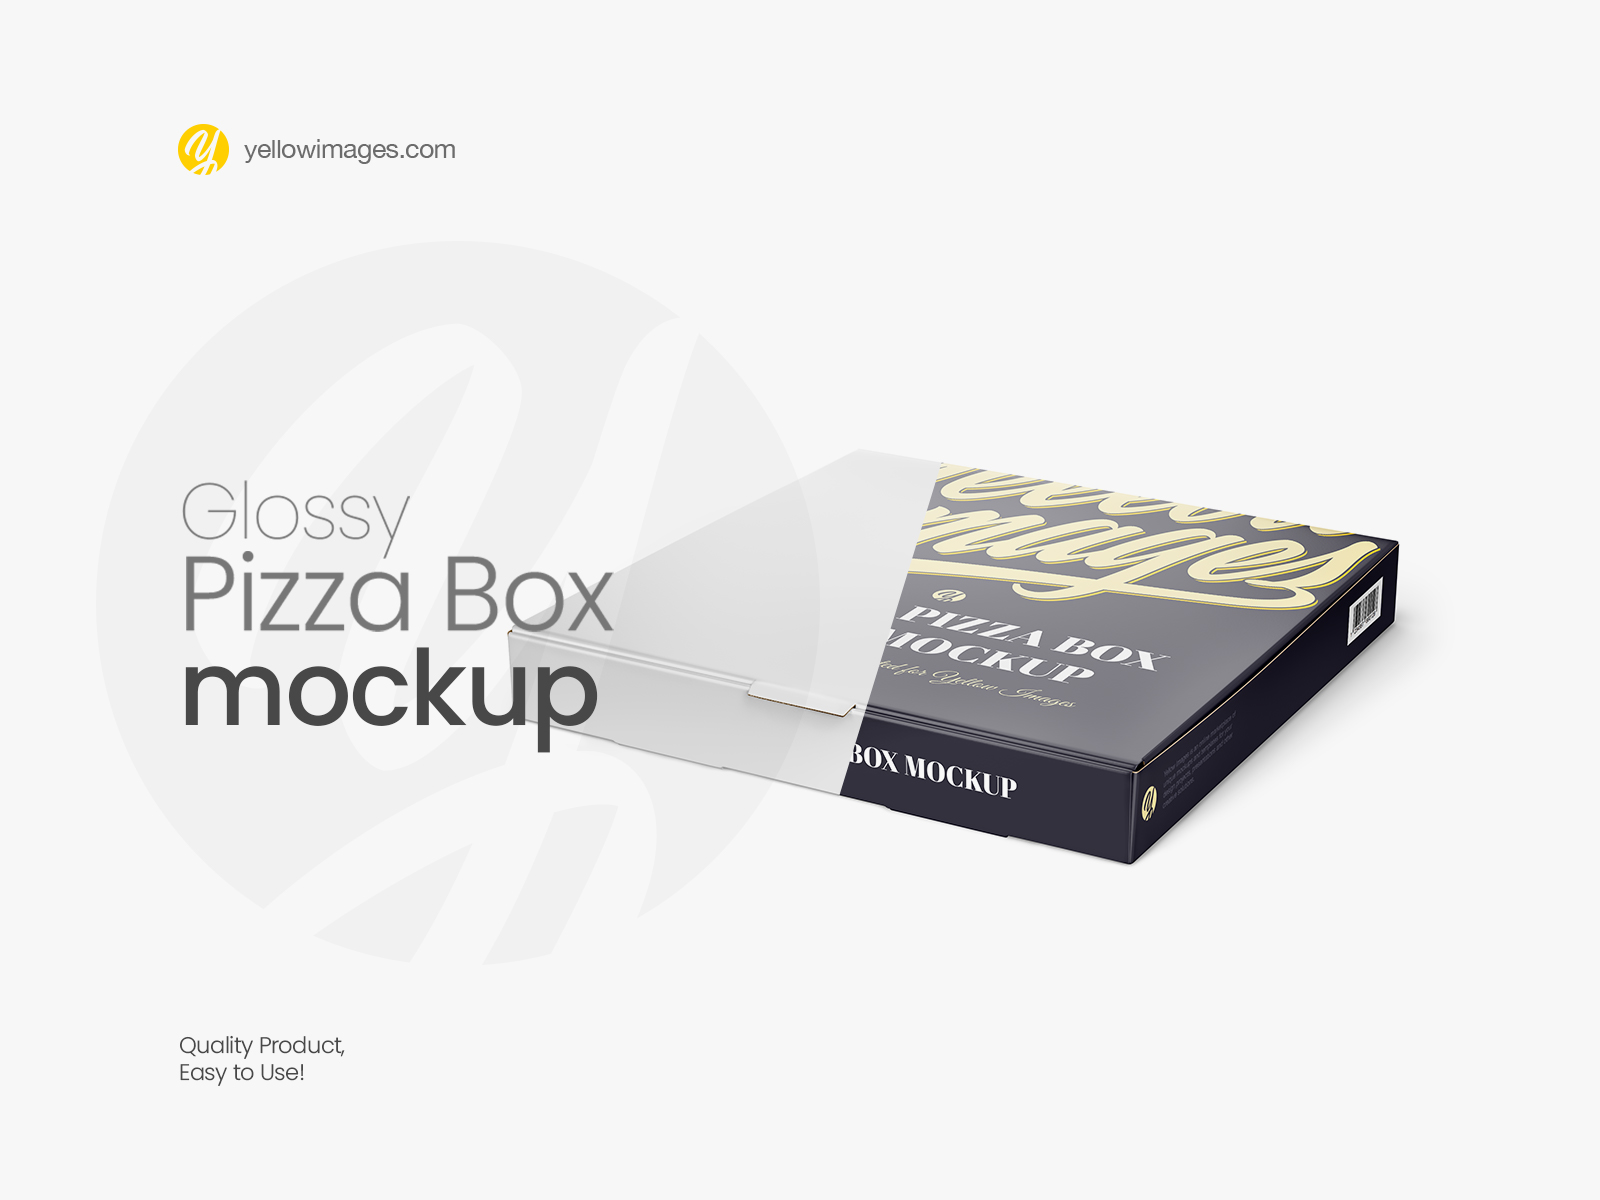 Download Food Box Mockup Download Free And Premium Psd Mockup Templates And Design Assets Yellowimages Mockups